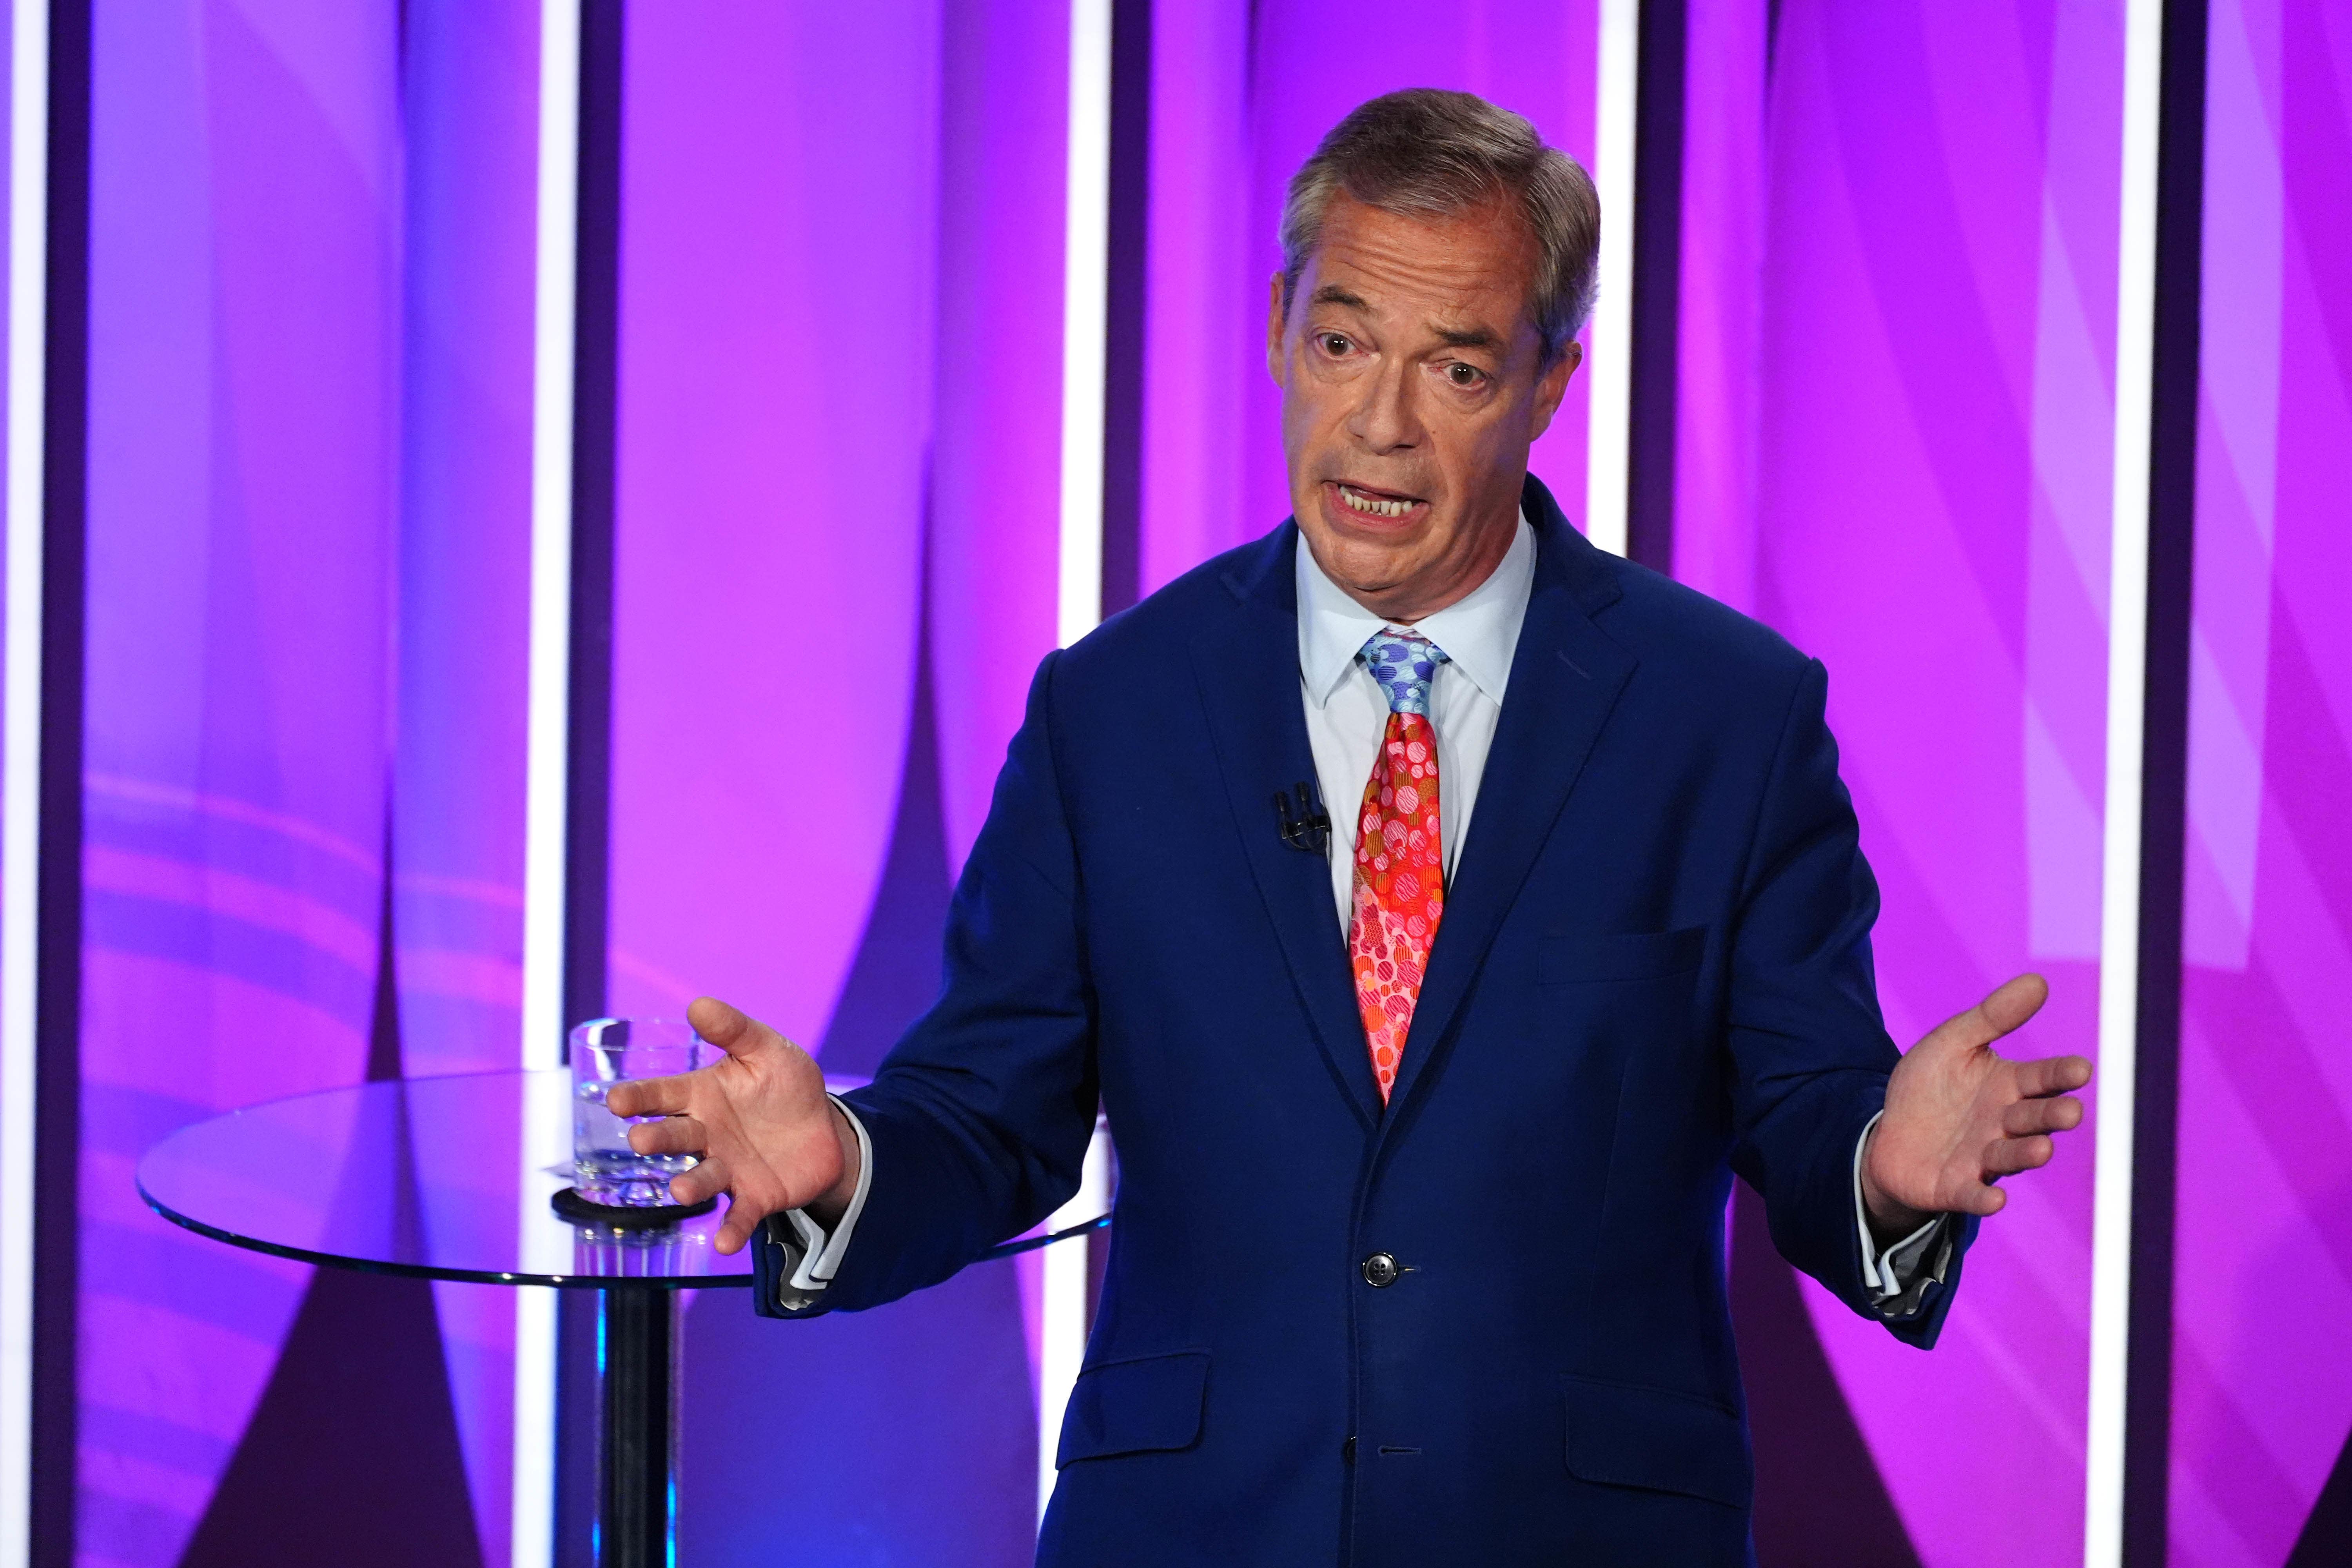 Liam Booth-Isherwood’s decision is a further blow to Nigel Farage